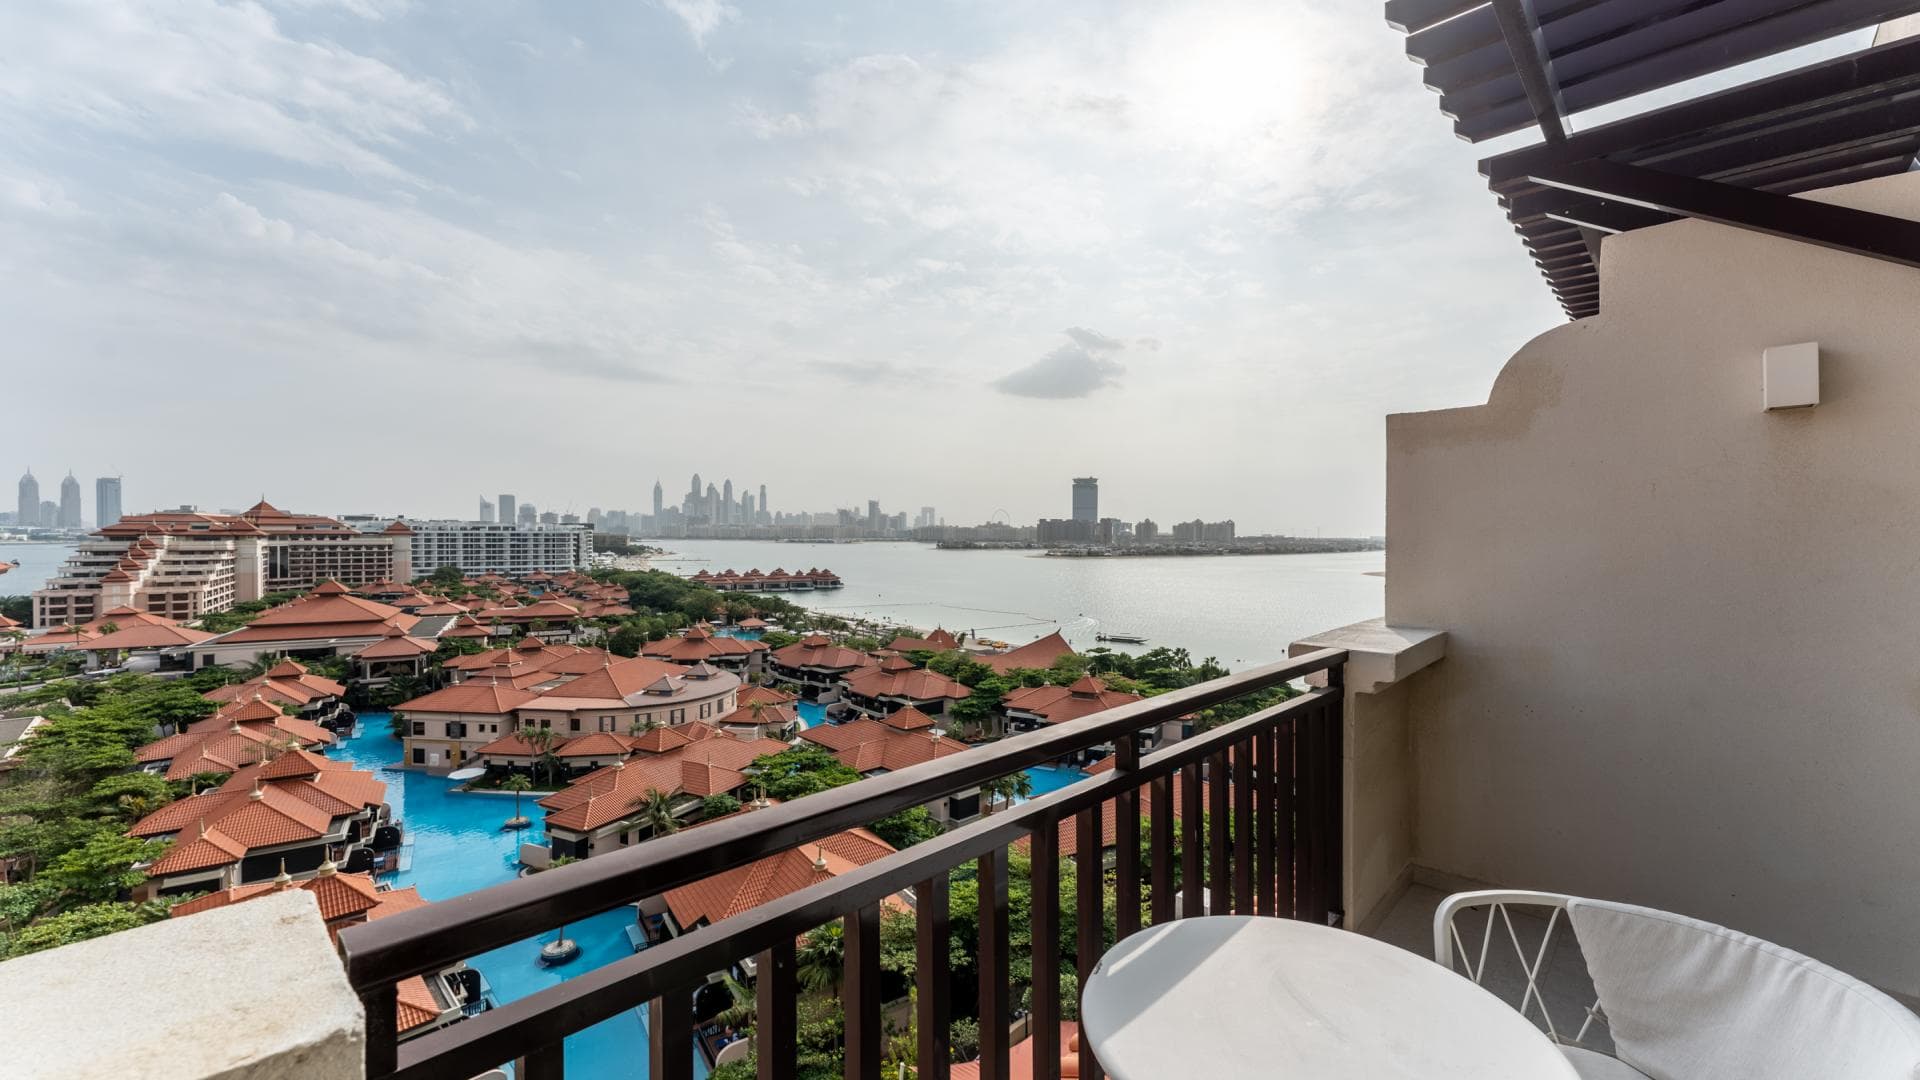 0 Bedroom Apartment For Sale Marina View Tower A Lp38654 13681bf2762dc800.jpg